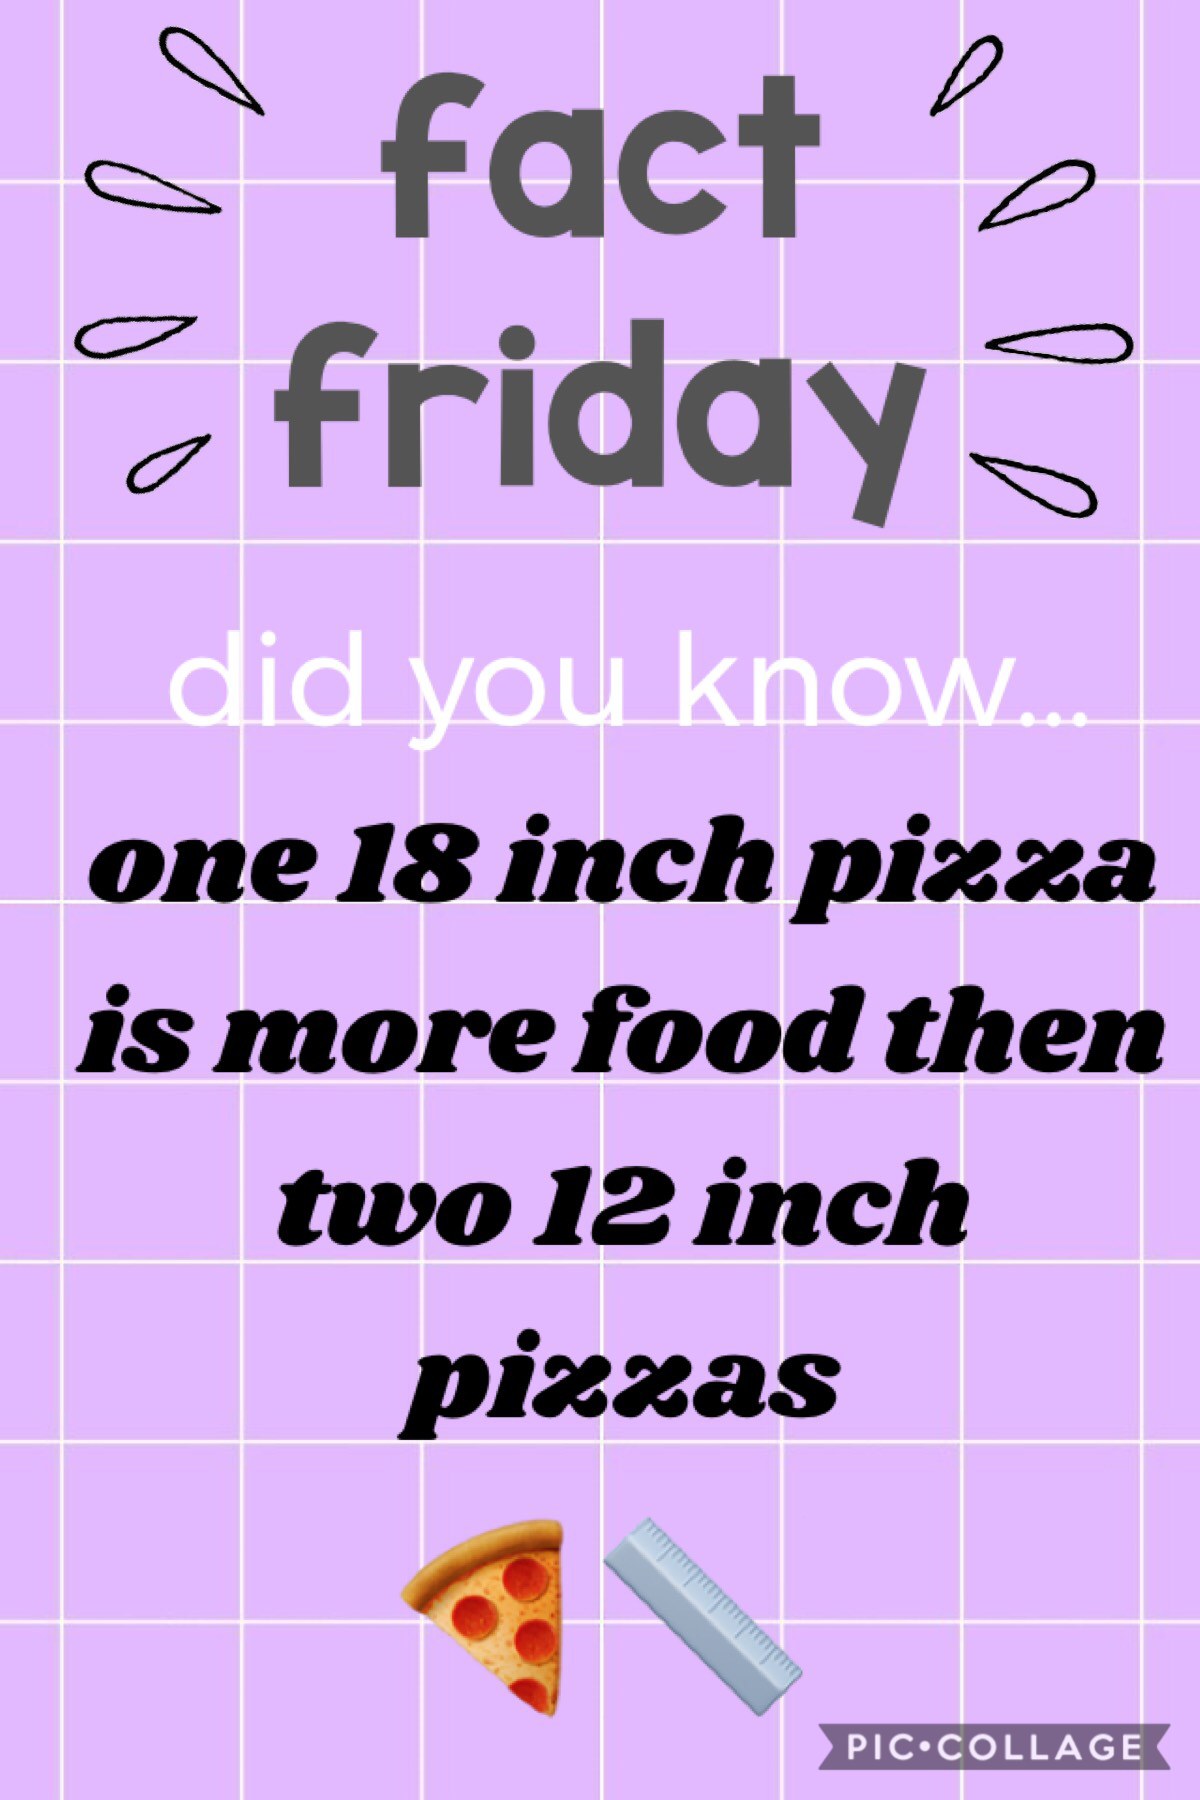 tap! 
fact friday!
follow for more facts!